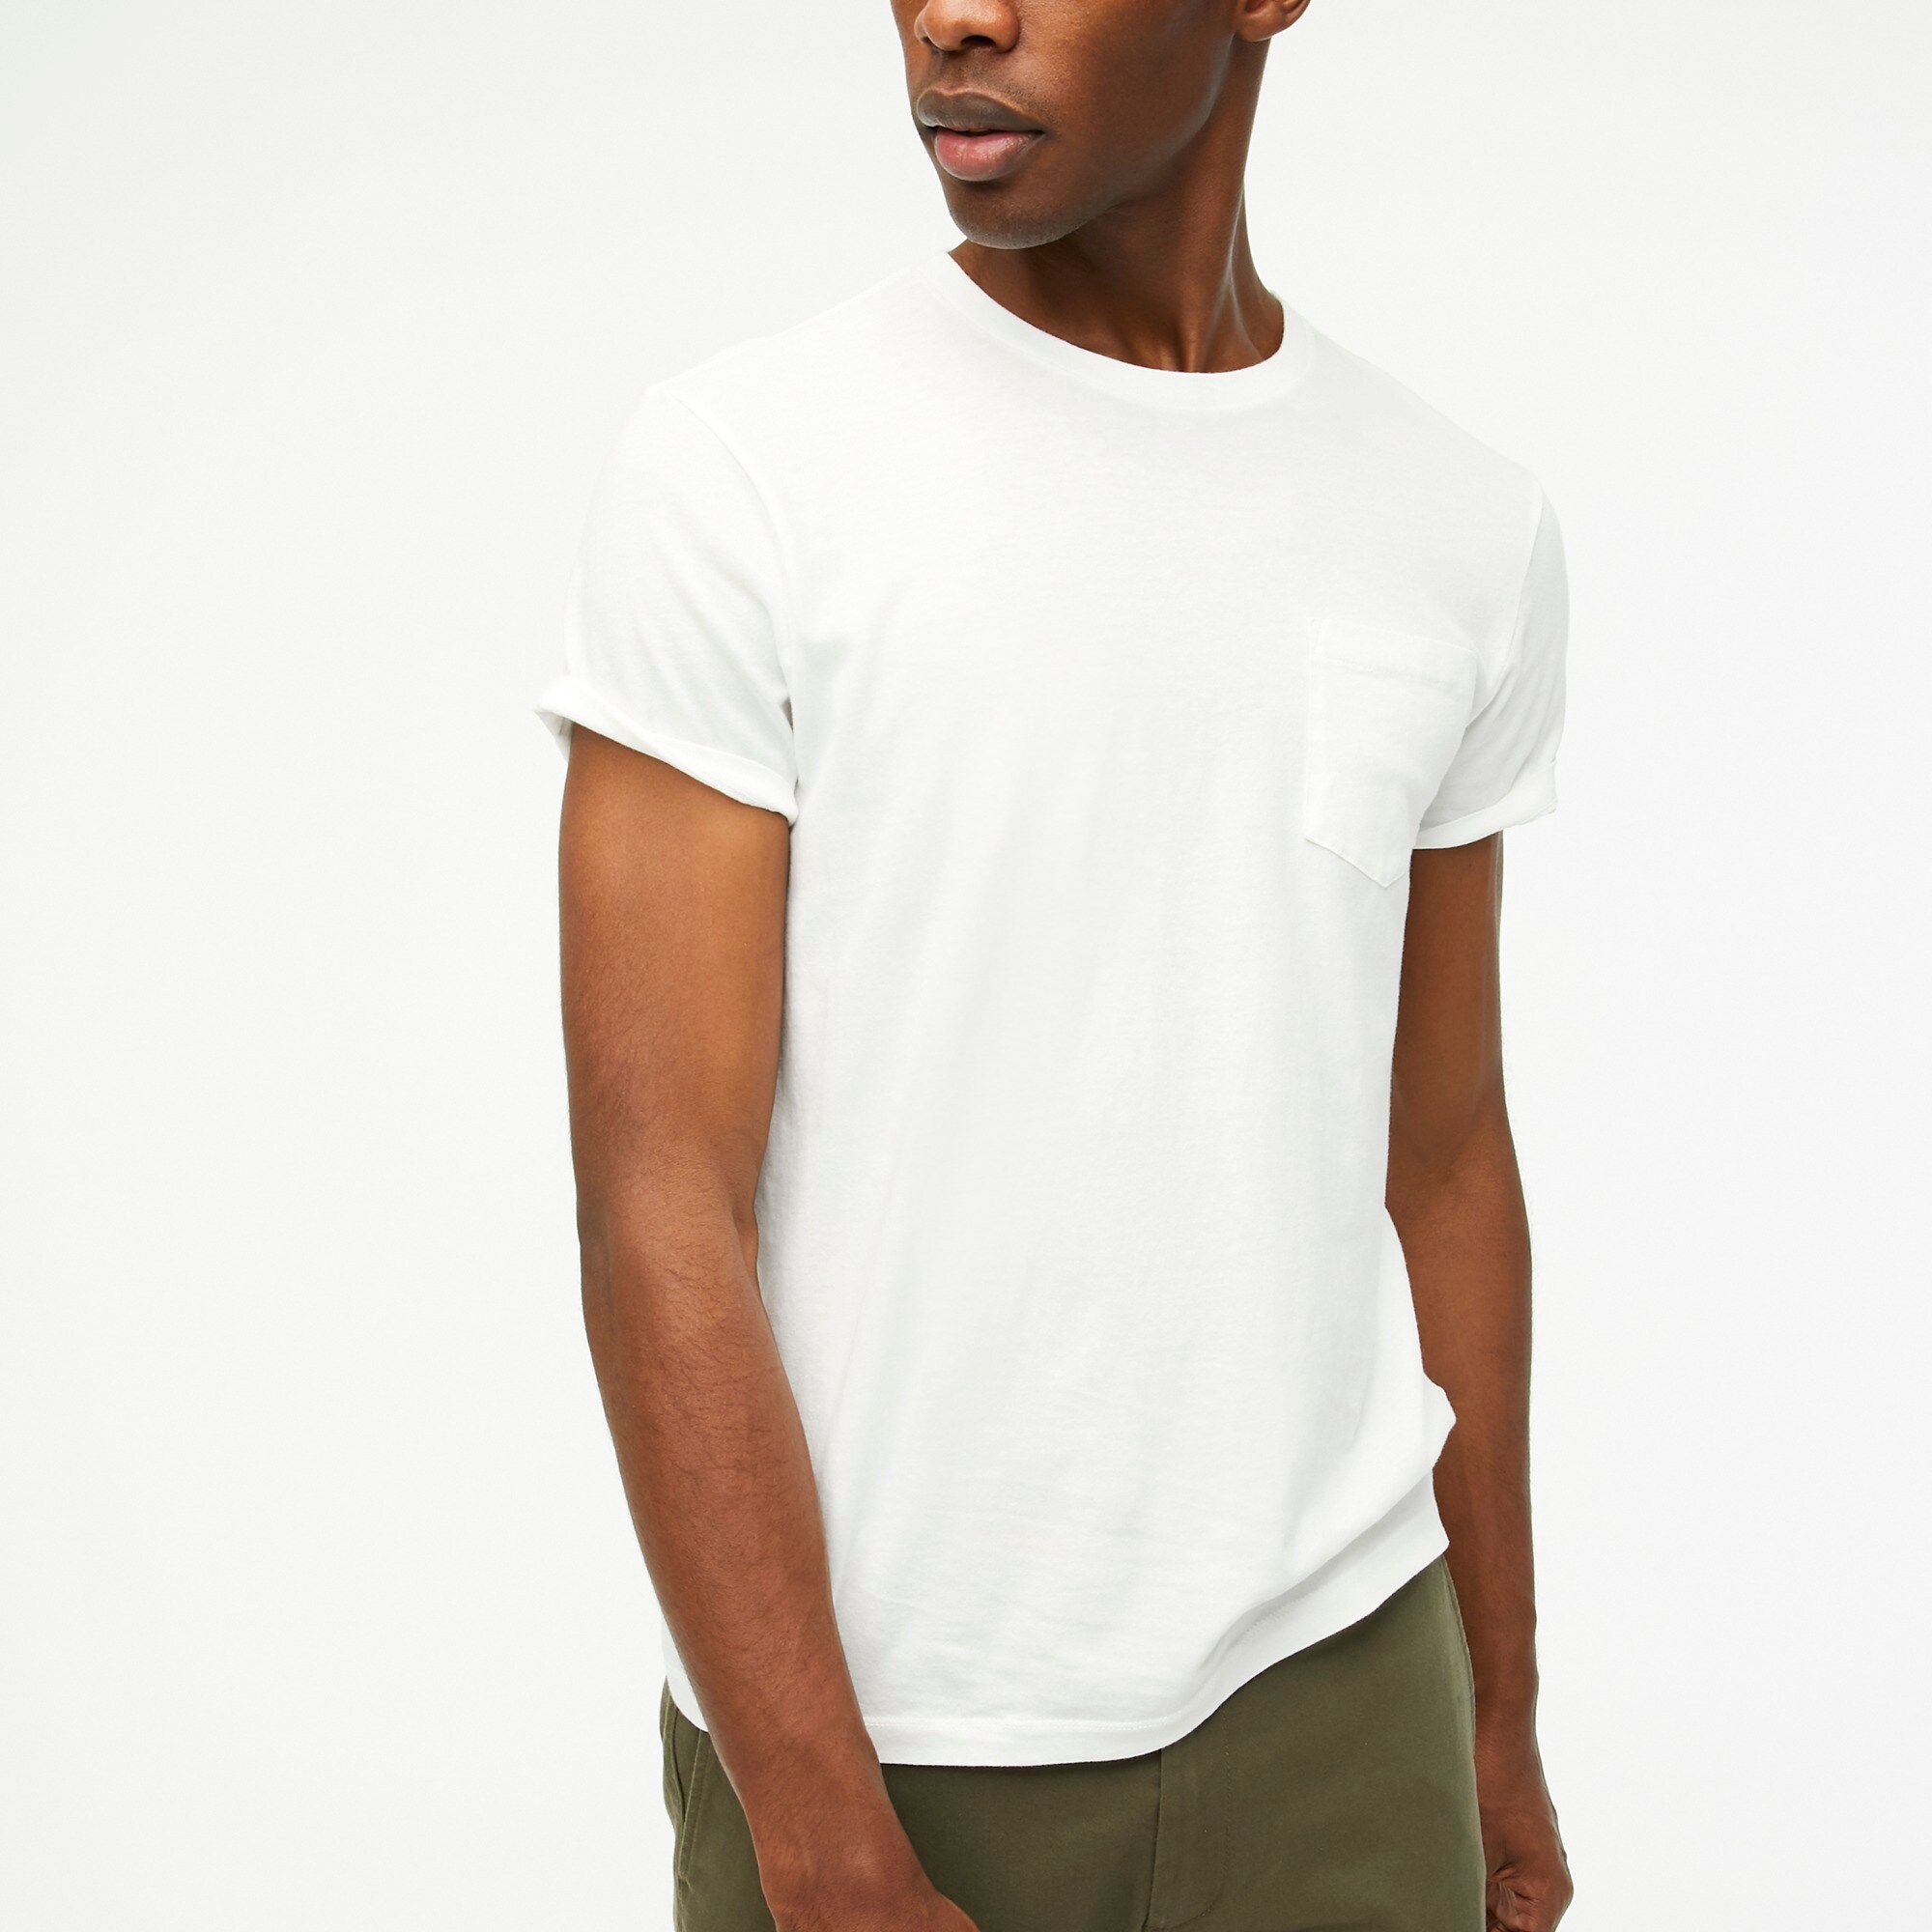  Cotton washed jersey pocket tee